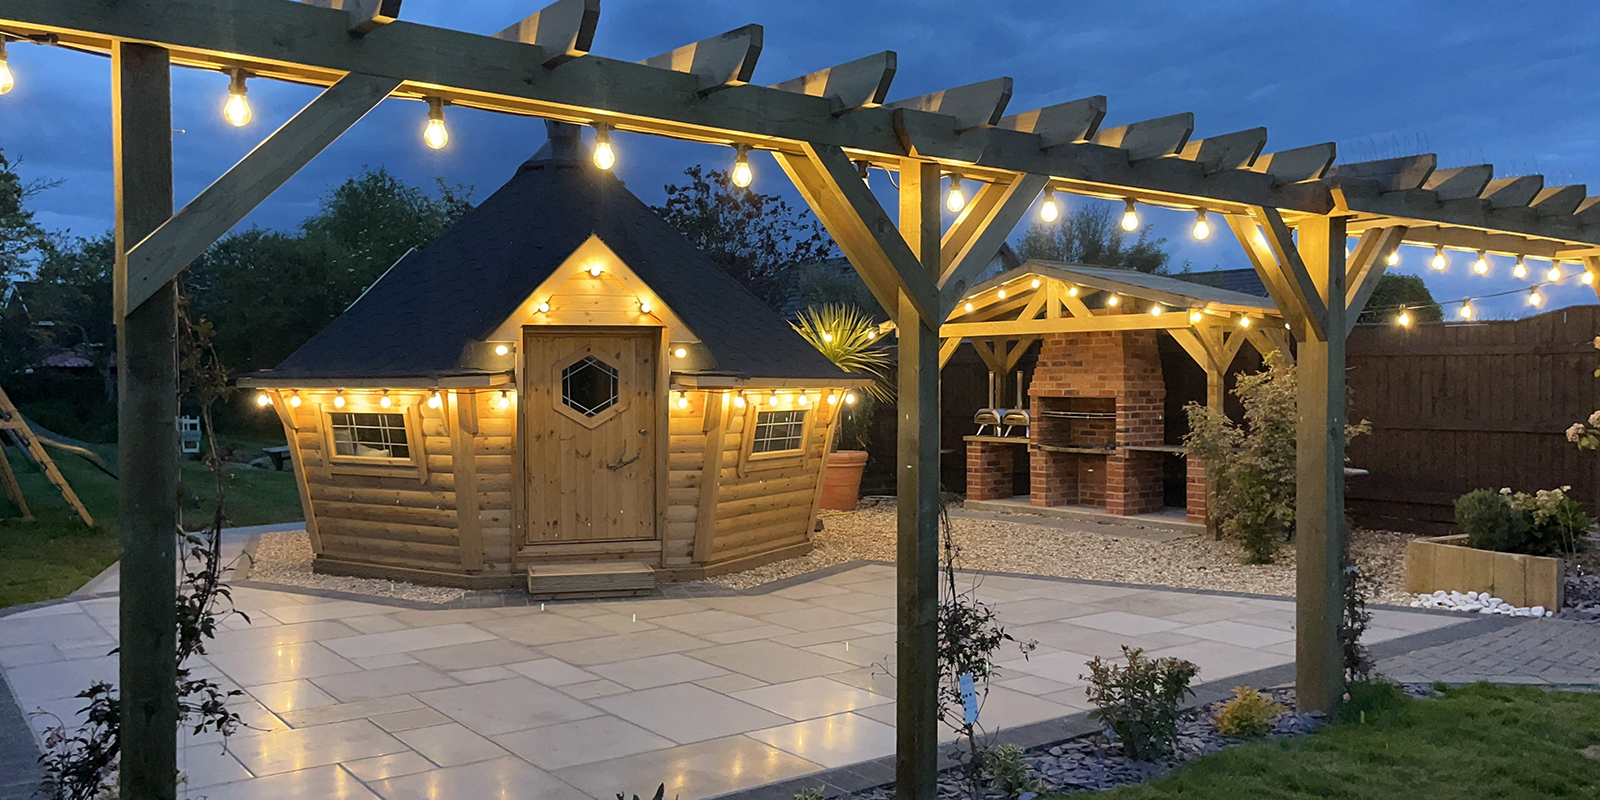 cabins lit up at night with fairy lights